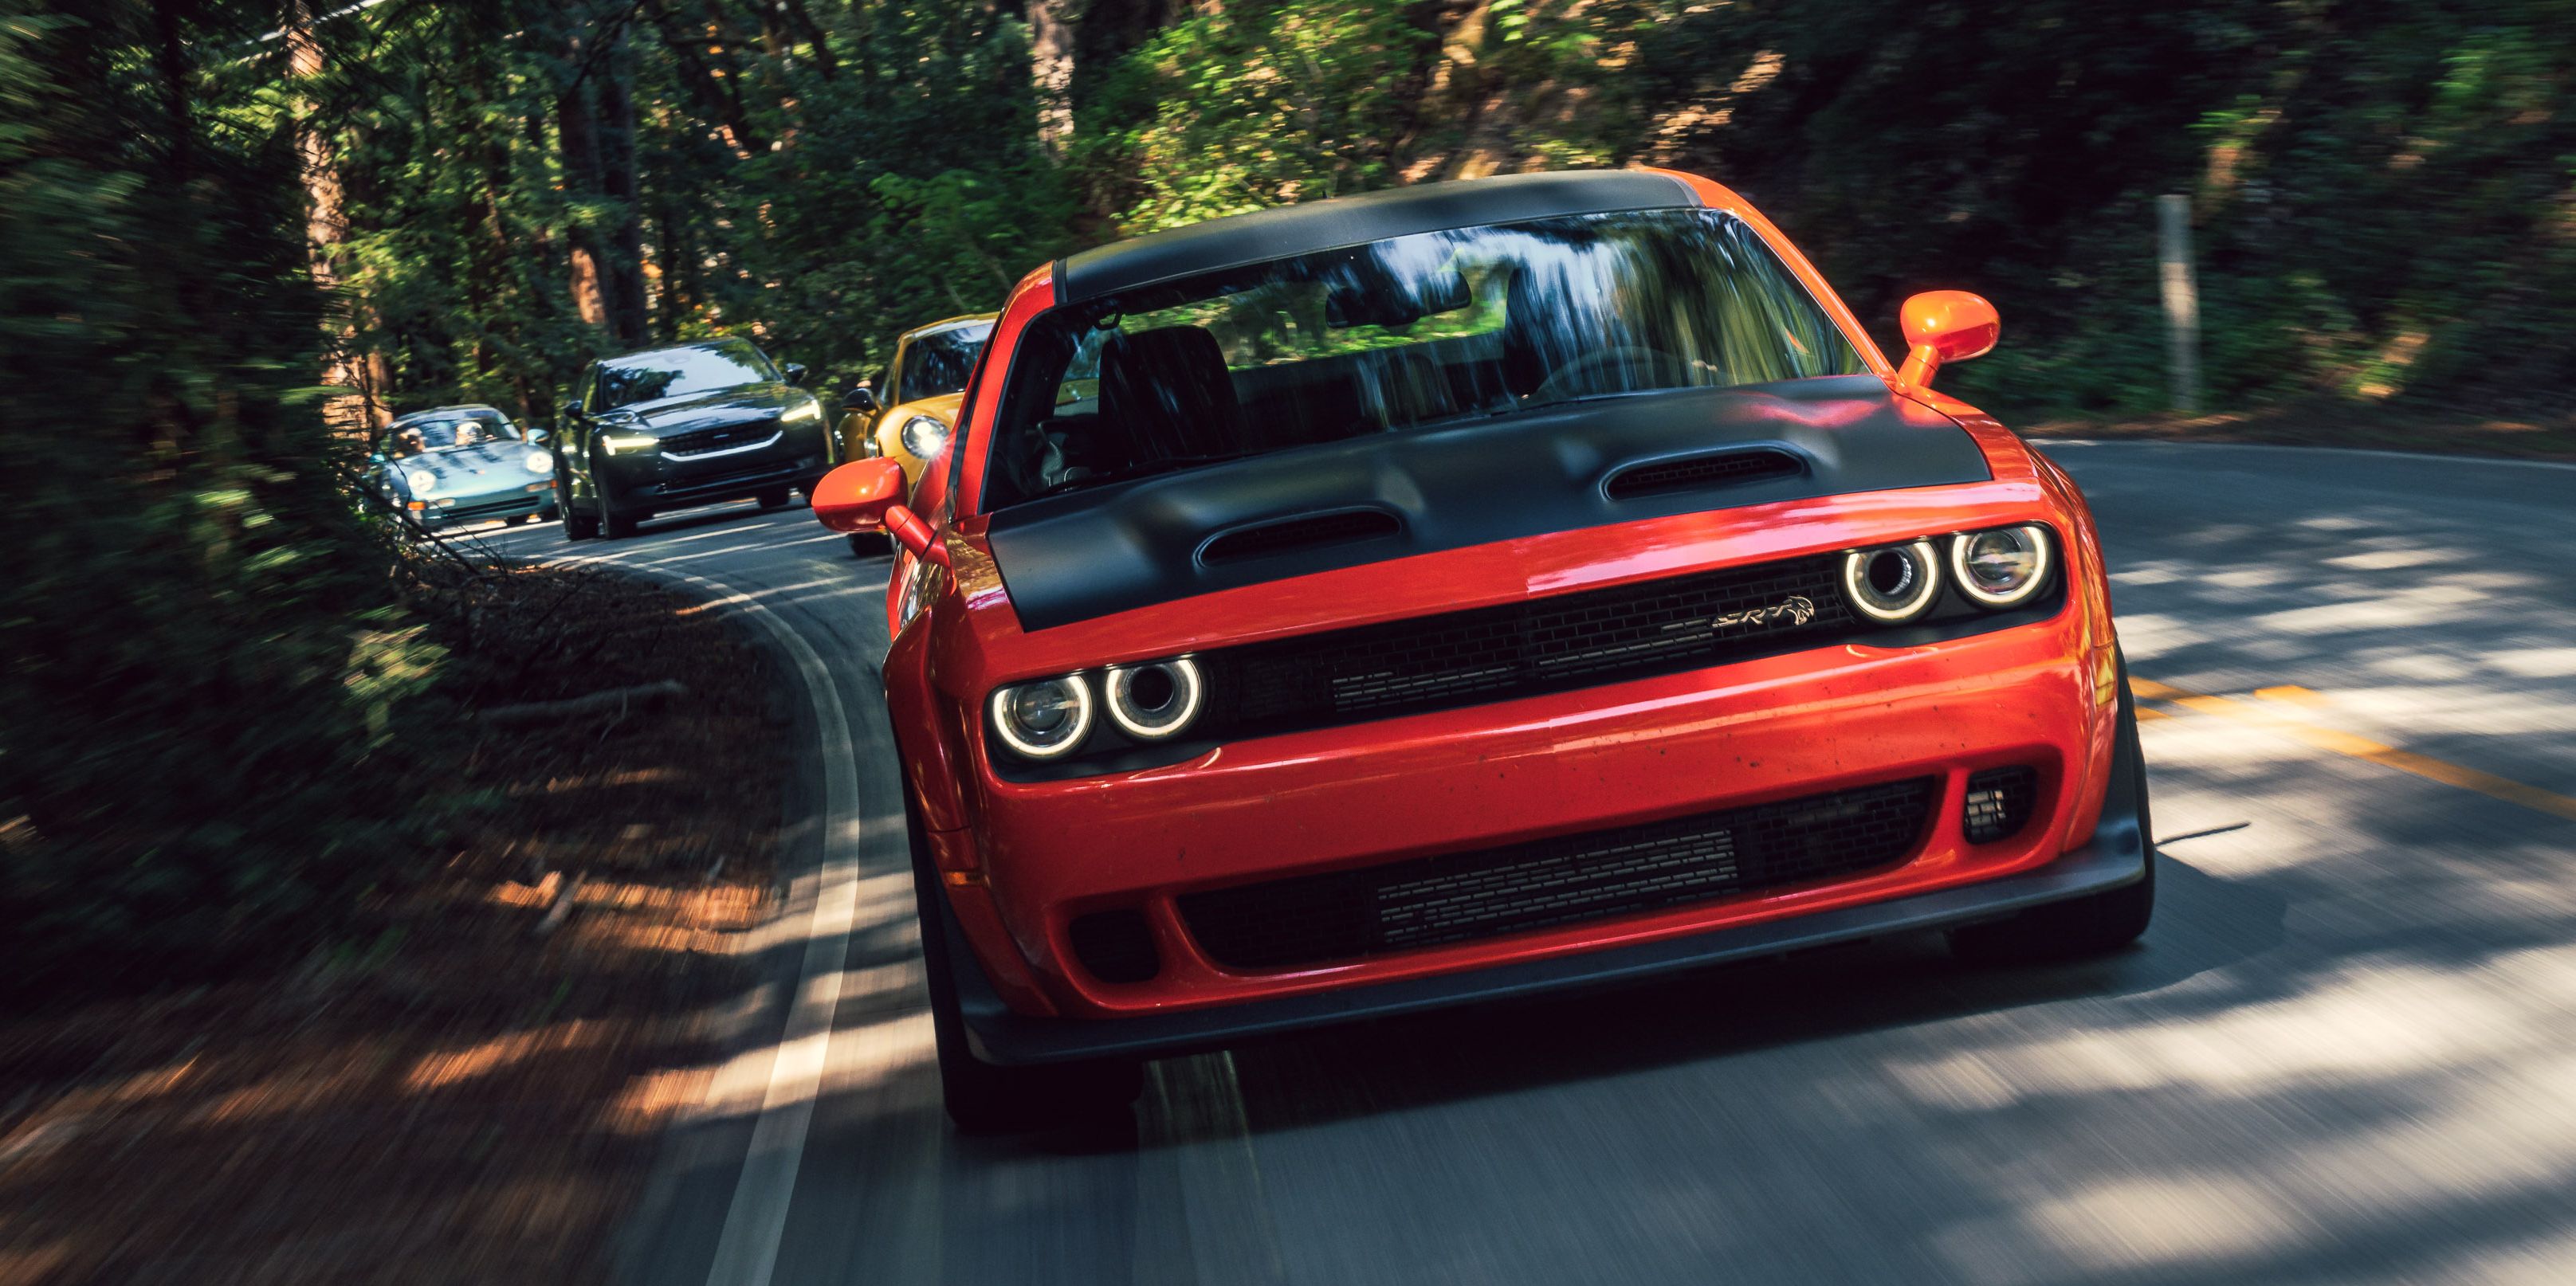 Dodge Reportedly Planning a Challenger With 909 HP That Runs on E85